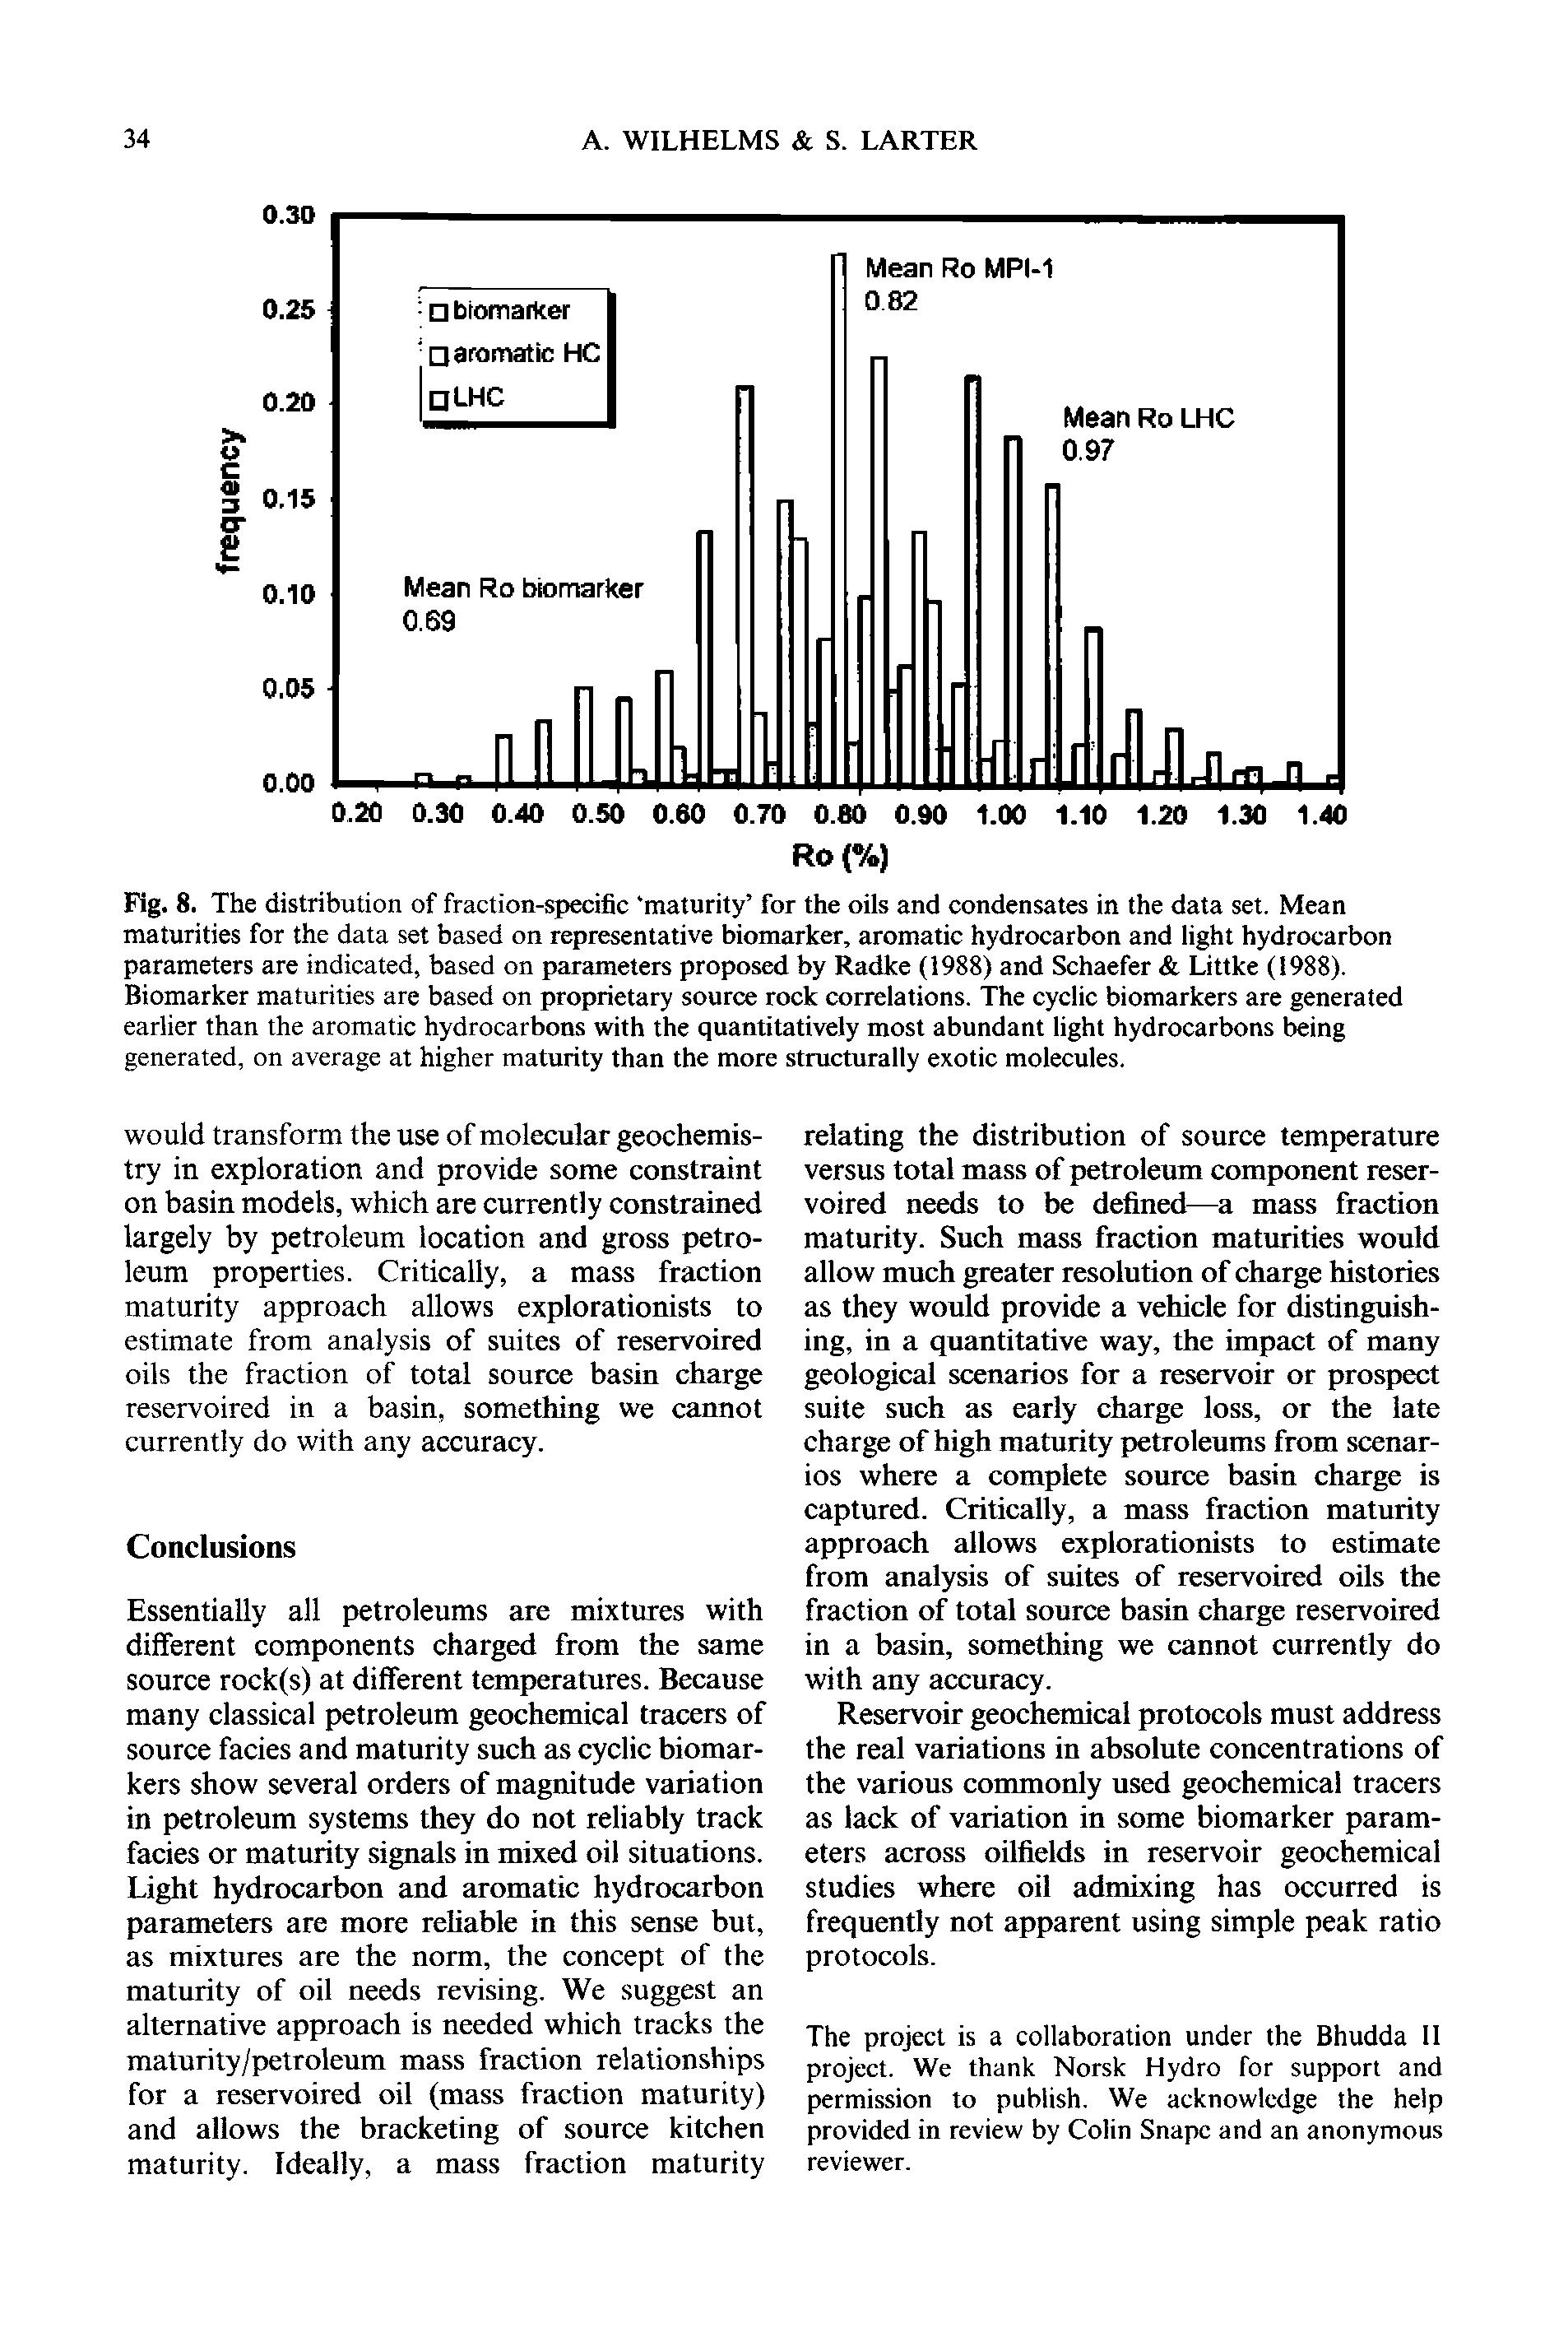 Fig. 8. The distribution of fraction-specific maturity for the oils and condensates in the data set. Mean maturities for the data set based on representative biomarker, aromatic hydrocarbon and light hydrocarbon parameters are indicated, based on parameters proposed by Radke (1988) and Schaefer Littke (1988). Biomarker maturities are based on proprietary source rock correlations. The cyclic biomarkers are generated earlier than the aromatic hydrocarbons with the quantitatively most abundant light hydrocarbons being generated, on average at higher maturity than the more structurally exotic molecules.